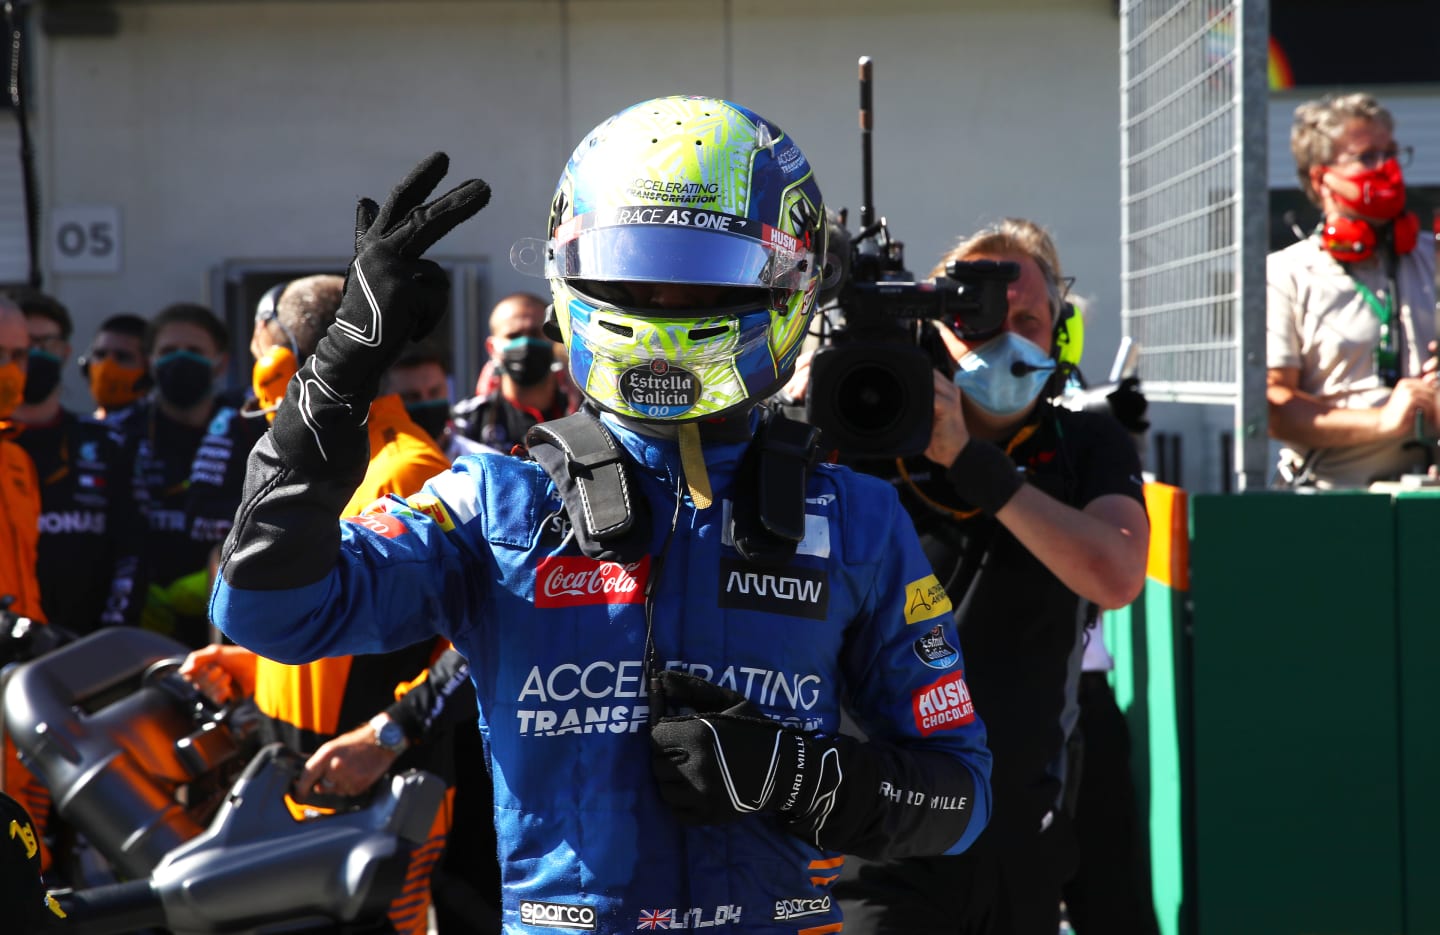 SPIELBERG, AUSTRIA - JULY 05: Third placed Lando Norris of Great Britain and McLaren F1 celebrates in parc ferme during the Formula One Grand Prix of Austria at Red Bull Ring on July 05, 2020 in Spielberg, Austria. (Photo by Mark Thompson/Getty Images)